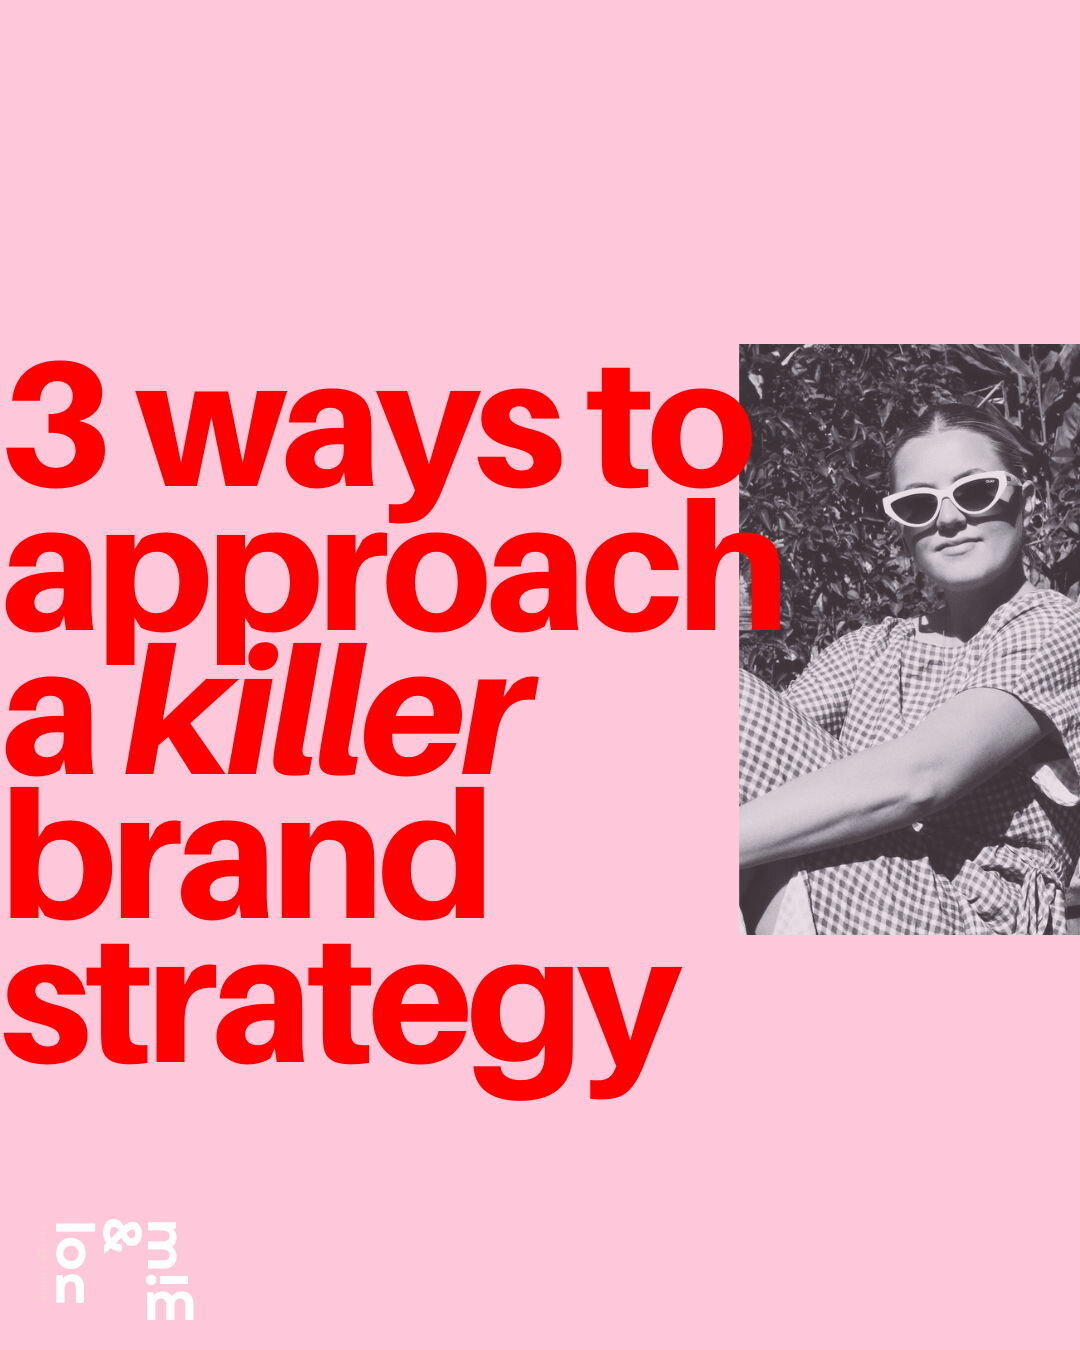 Read my latest design bite on brand strategy and how to level up your brand 🌈 the link is in my bio 🔗

mimandlou.com/design-bites/3-ways-to-approach-a-killer-brand-strategy

#branding #brandstrategy #smallbusiness #creatives #graphicdesign #support